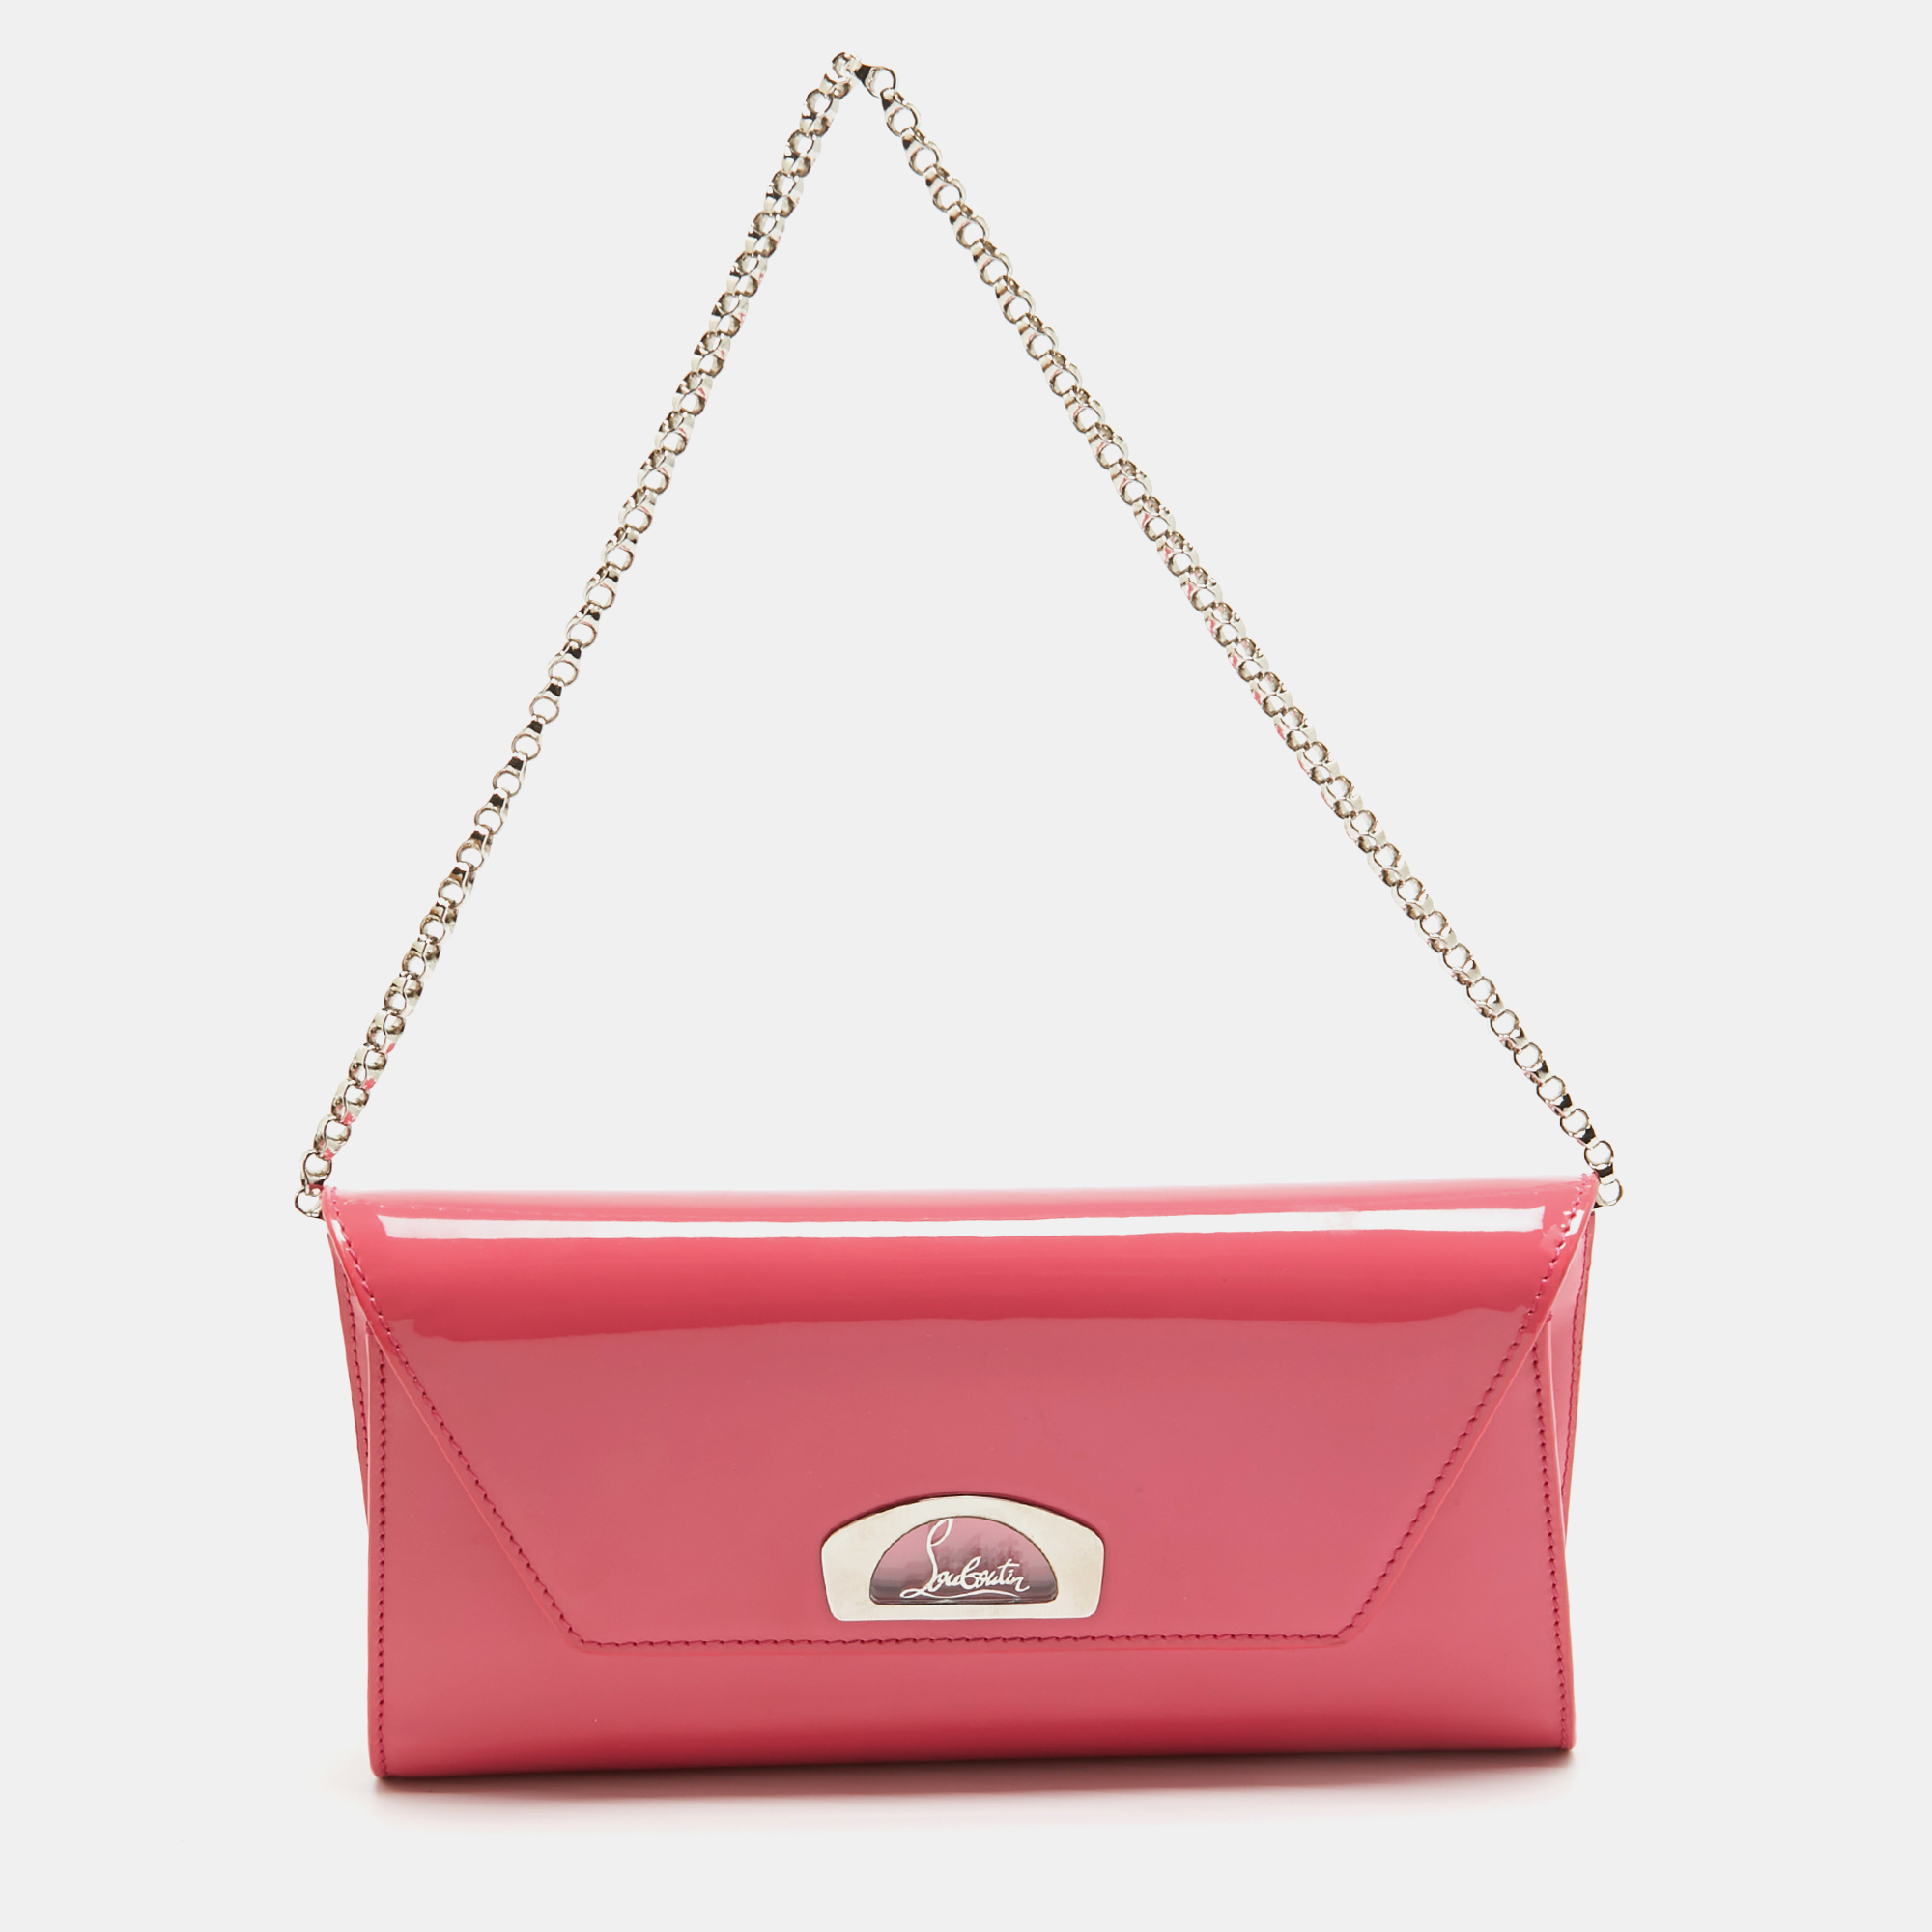 Pre-owned Christian Louboutin Pink Patent Leather Vero Dodat Chain Clutch